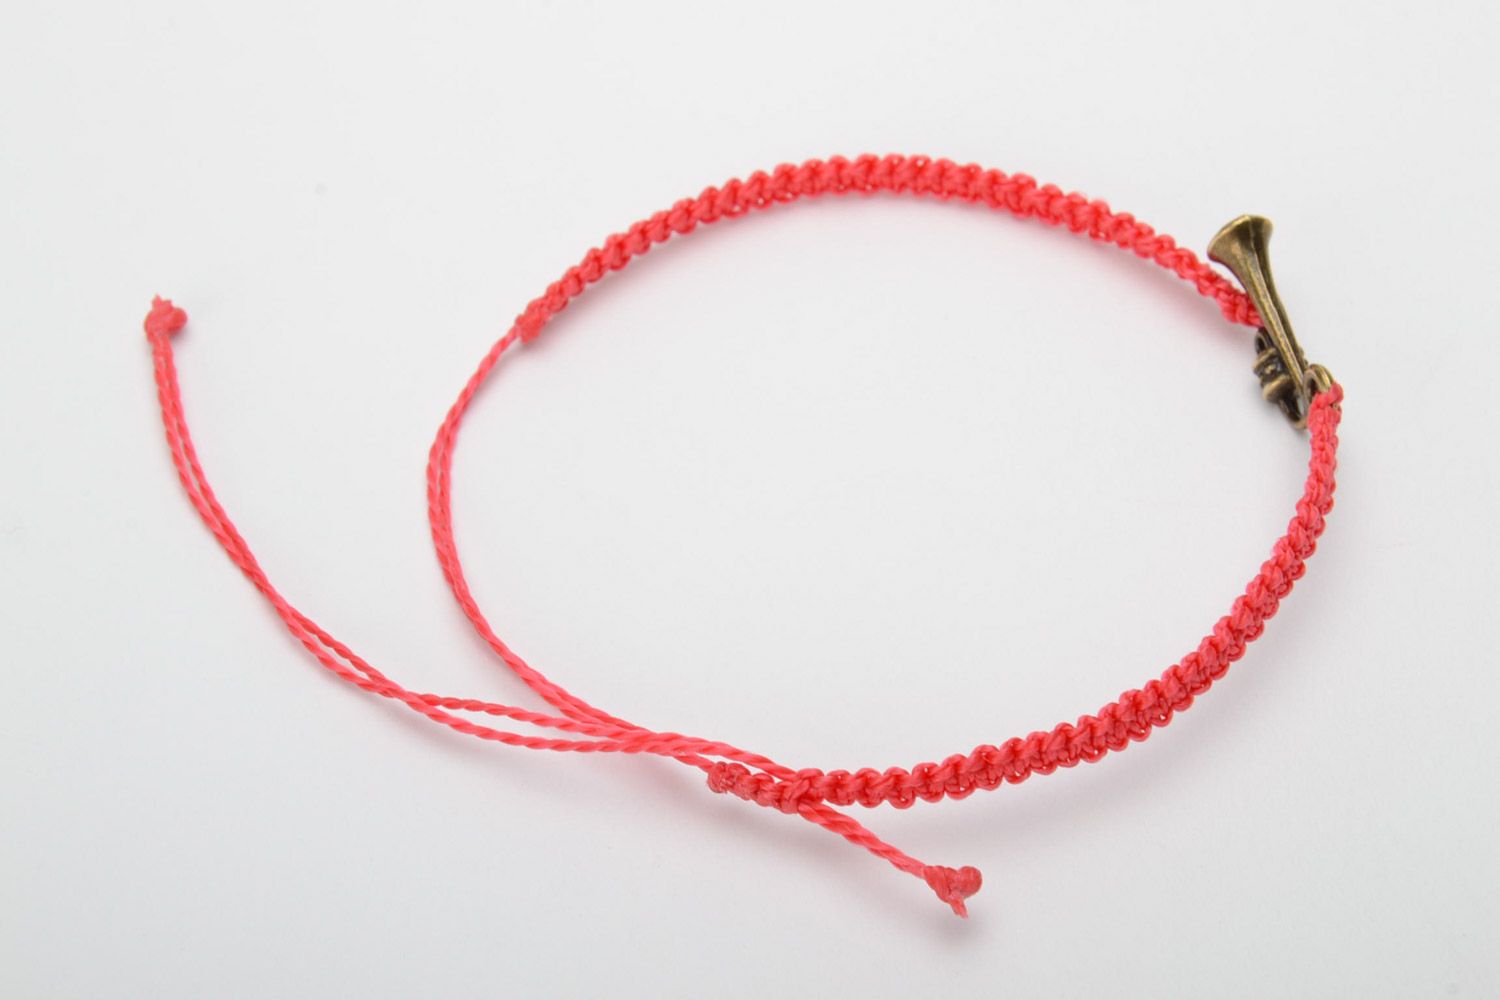 Handmade red woven capron thread bracelet with metal charm in the shape of saxophone photo 4